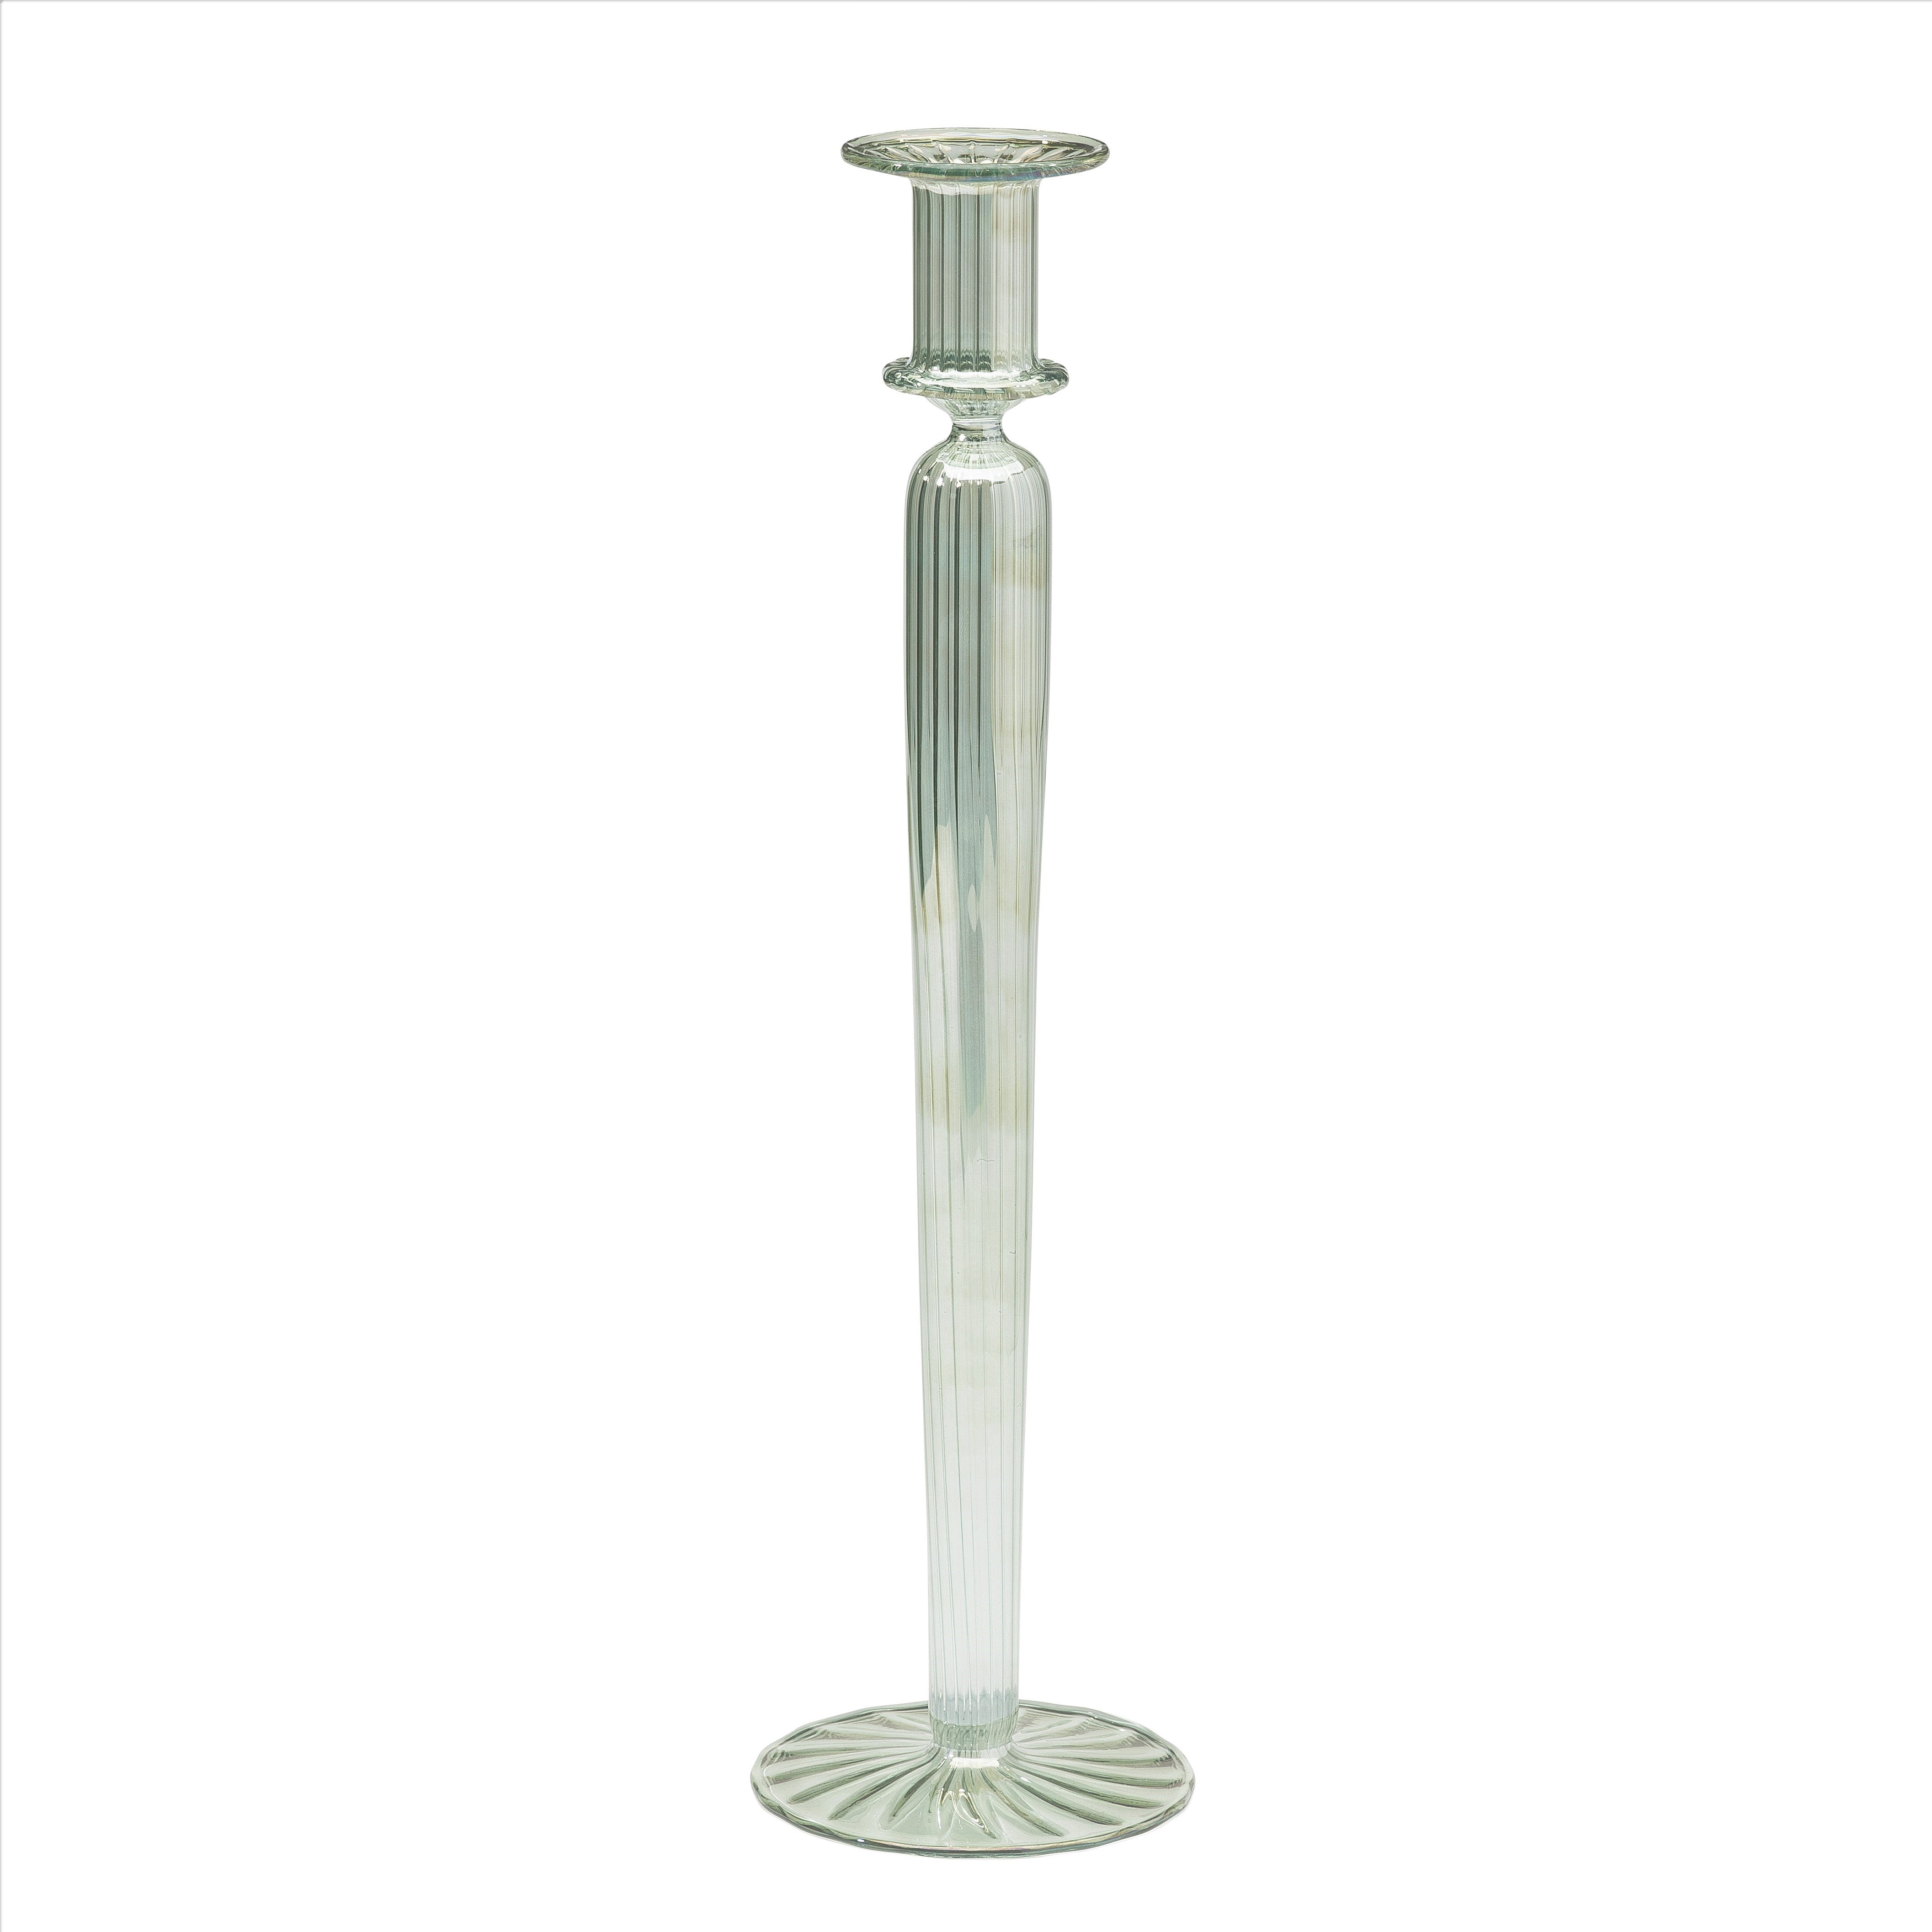 The Sage Glass - Candle Holder